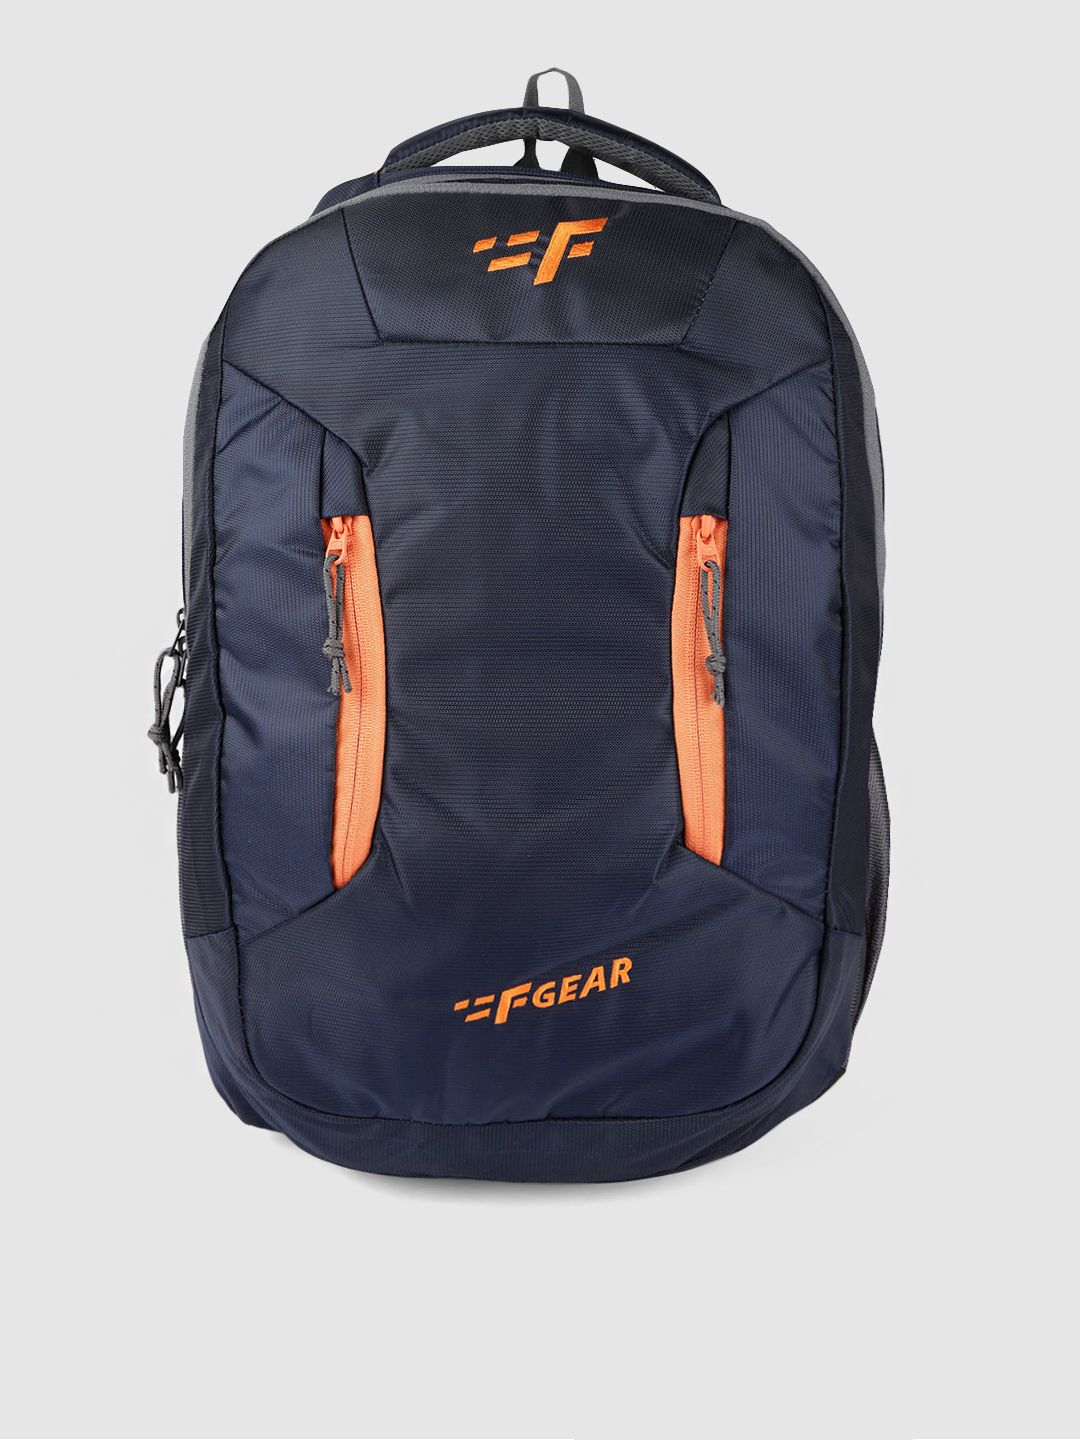 F Gear Unisex Navy Blue Solid Amigo Doby Laptop Backpack Price in India